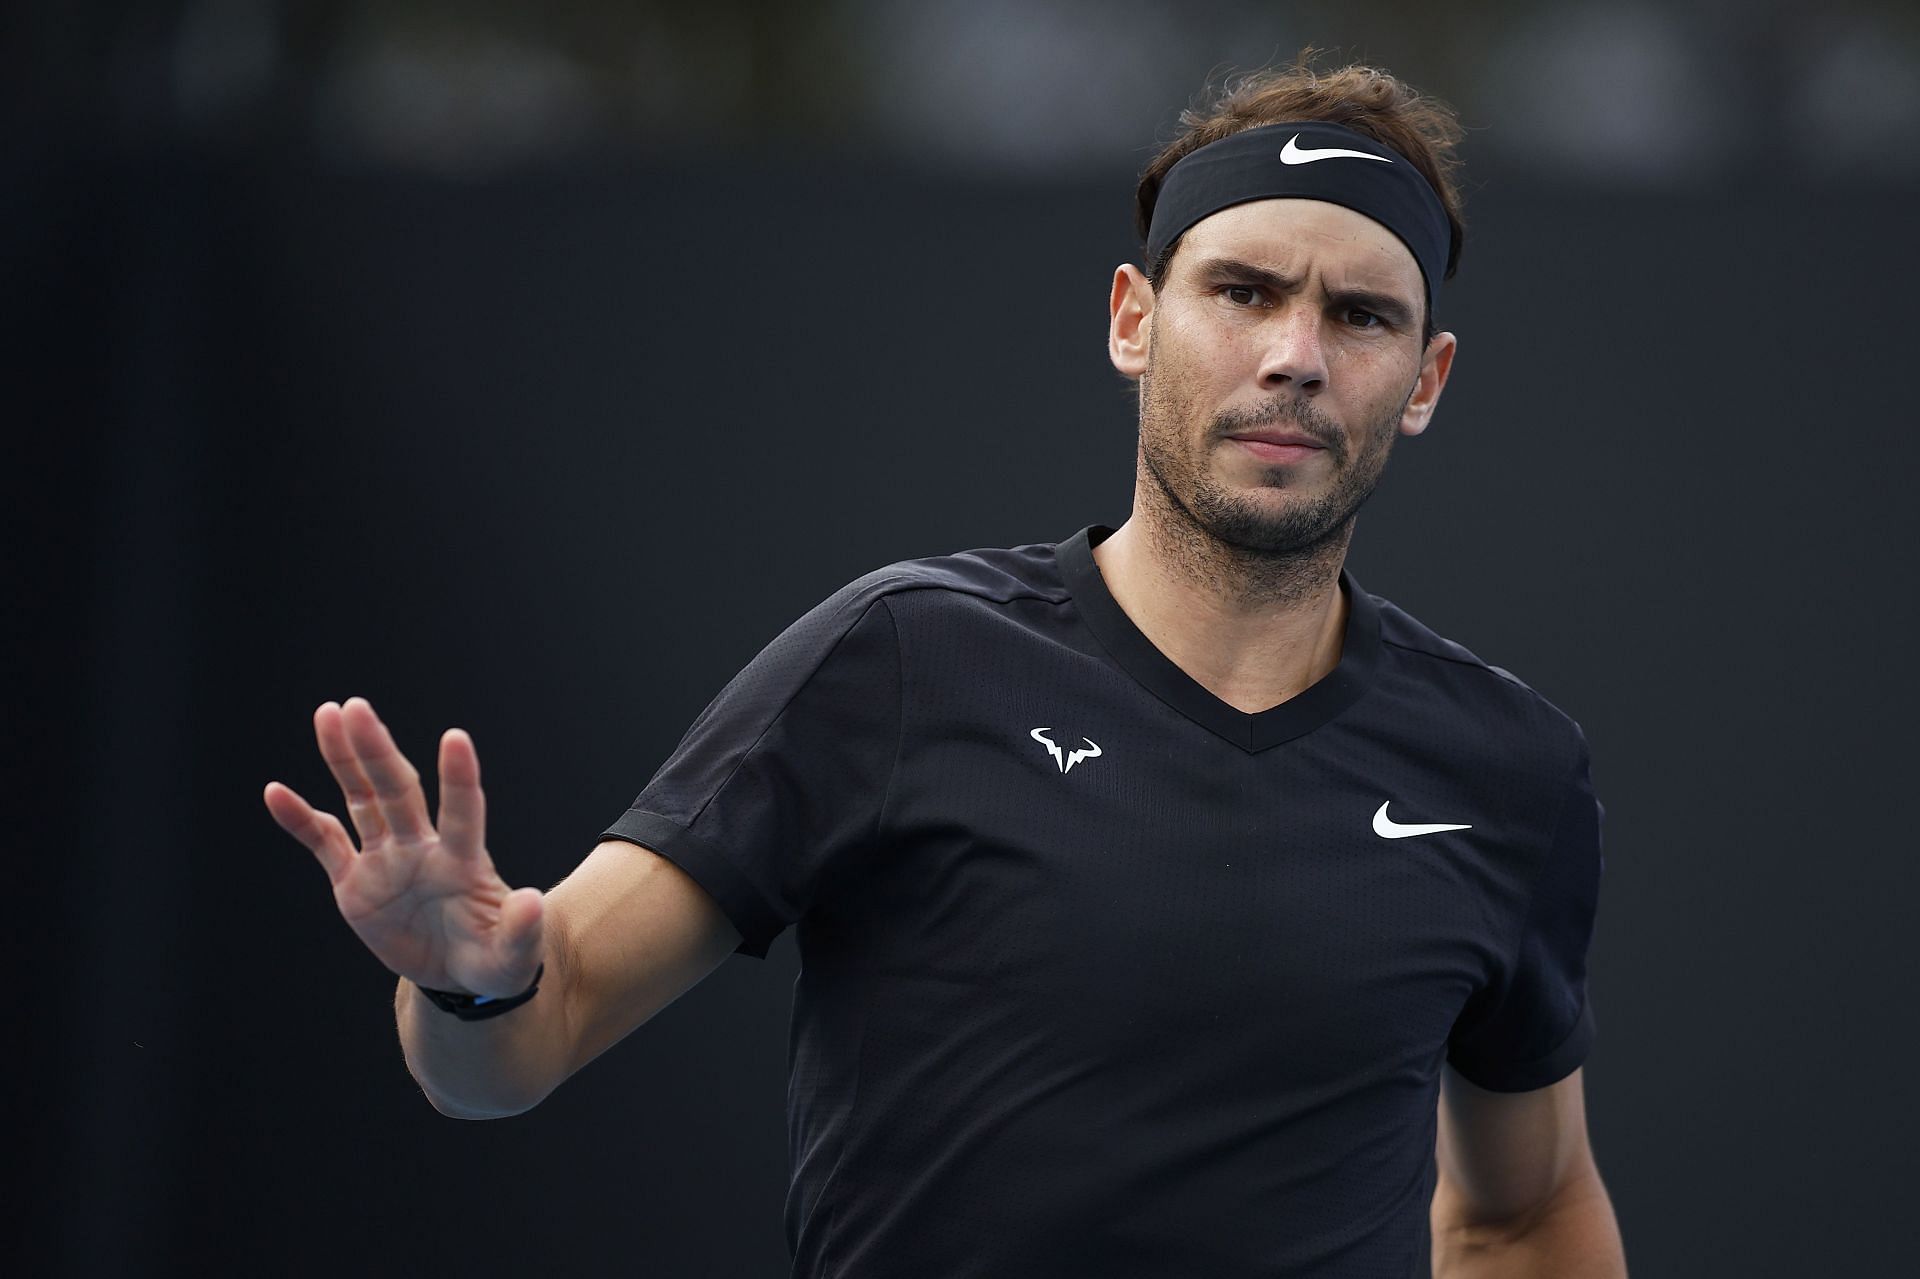 Rafael Nadal reacts to fans at the Melbourne Summer Set 2022